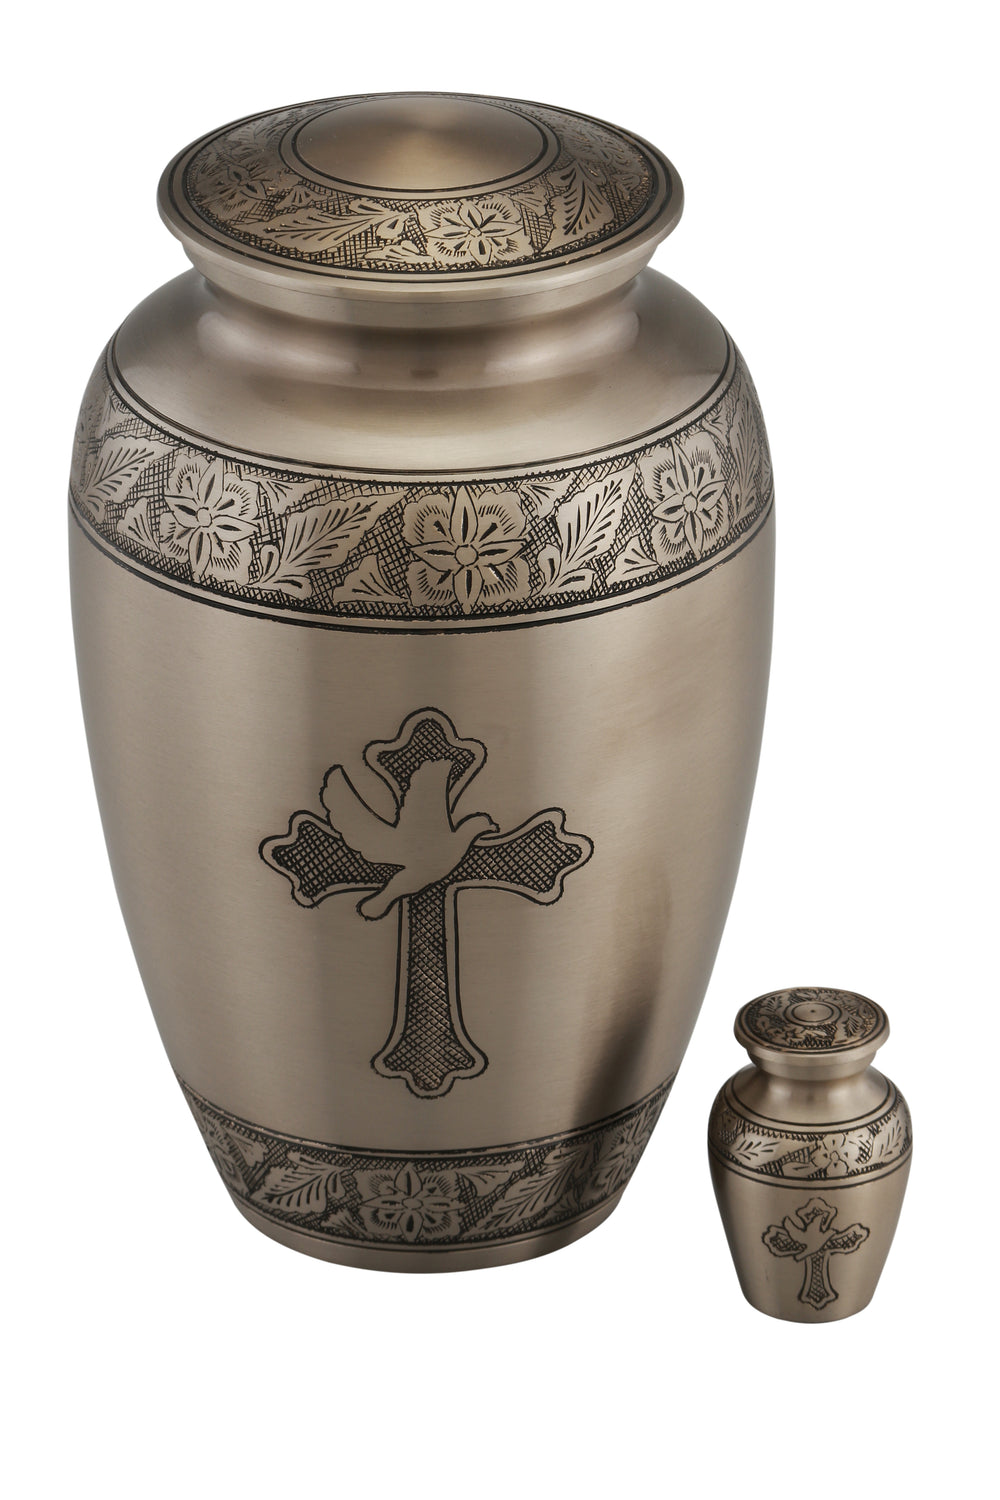 Classic Cross & Dove Cremation Urn - Pewter - Overstock Deal LU100